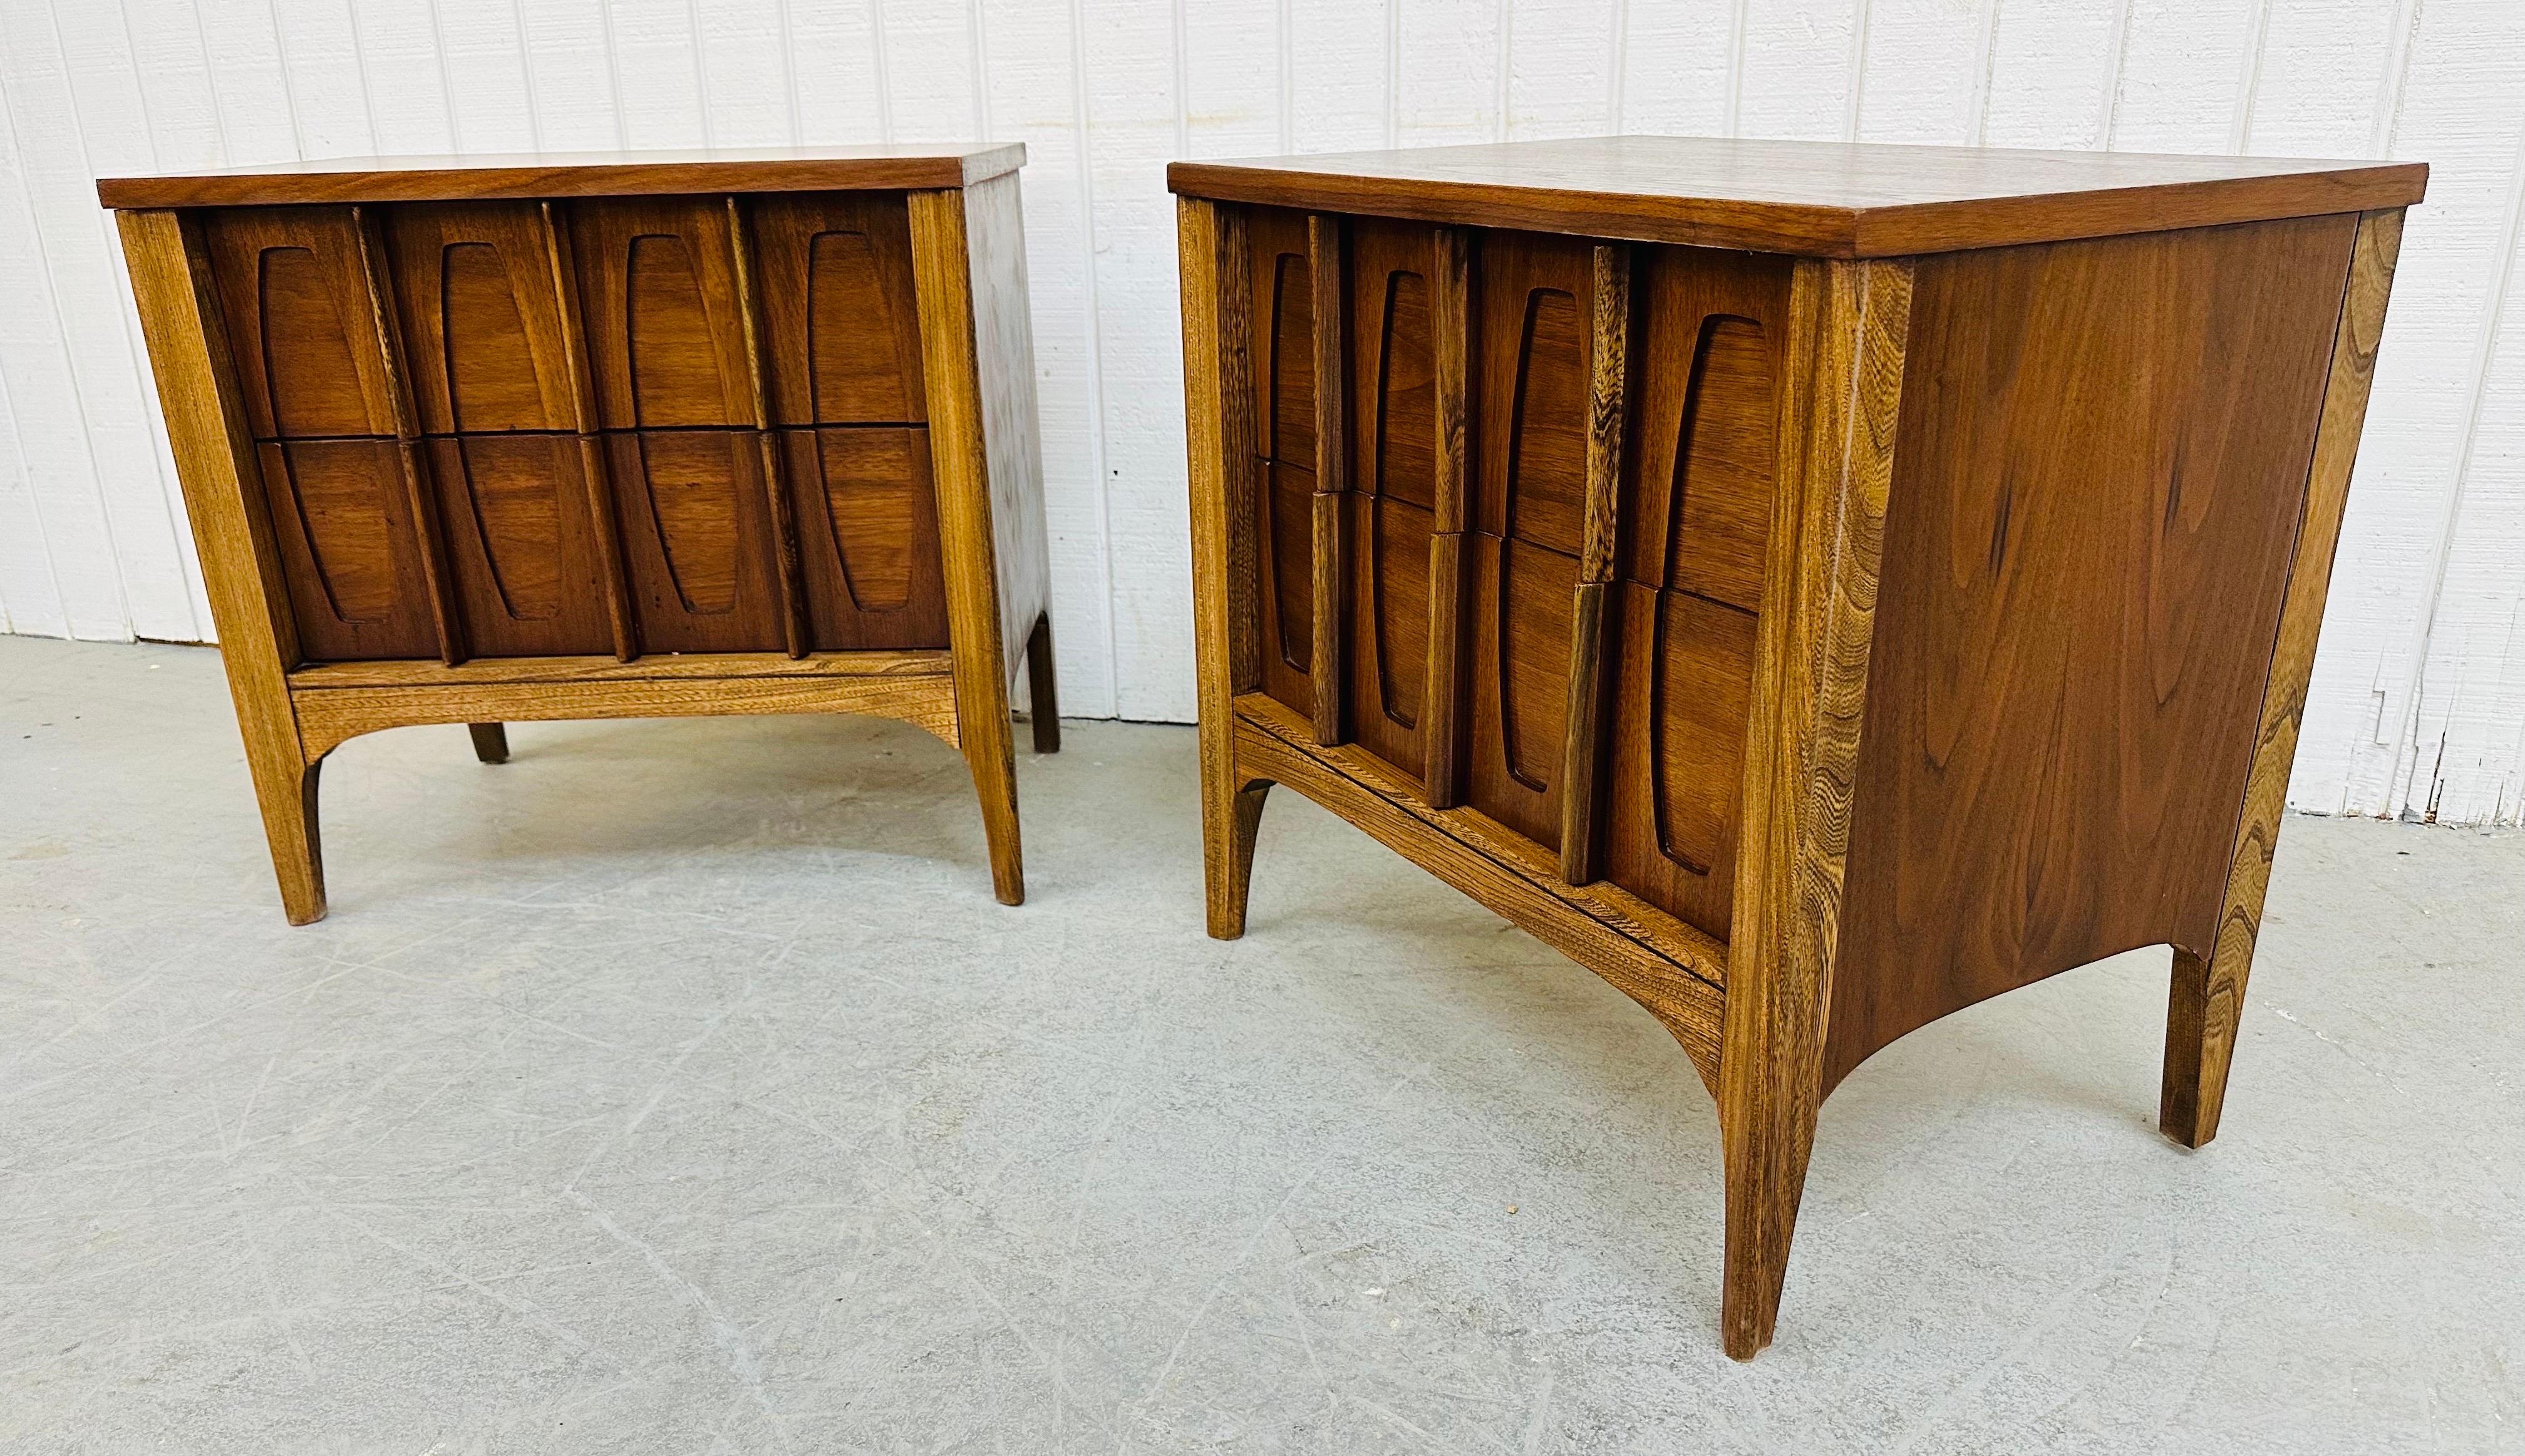 This listing is for a pair of Mid-Century Modern Walnut Nightstands. Featuring two drawers with brutalist designed fronts, rectangular tops, and a beautiful walnut finish. This is an exceptional combination of quality and modern design.